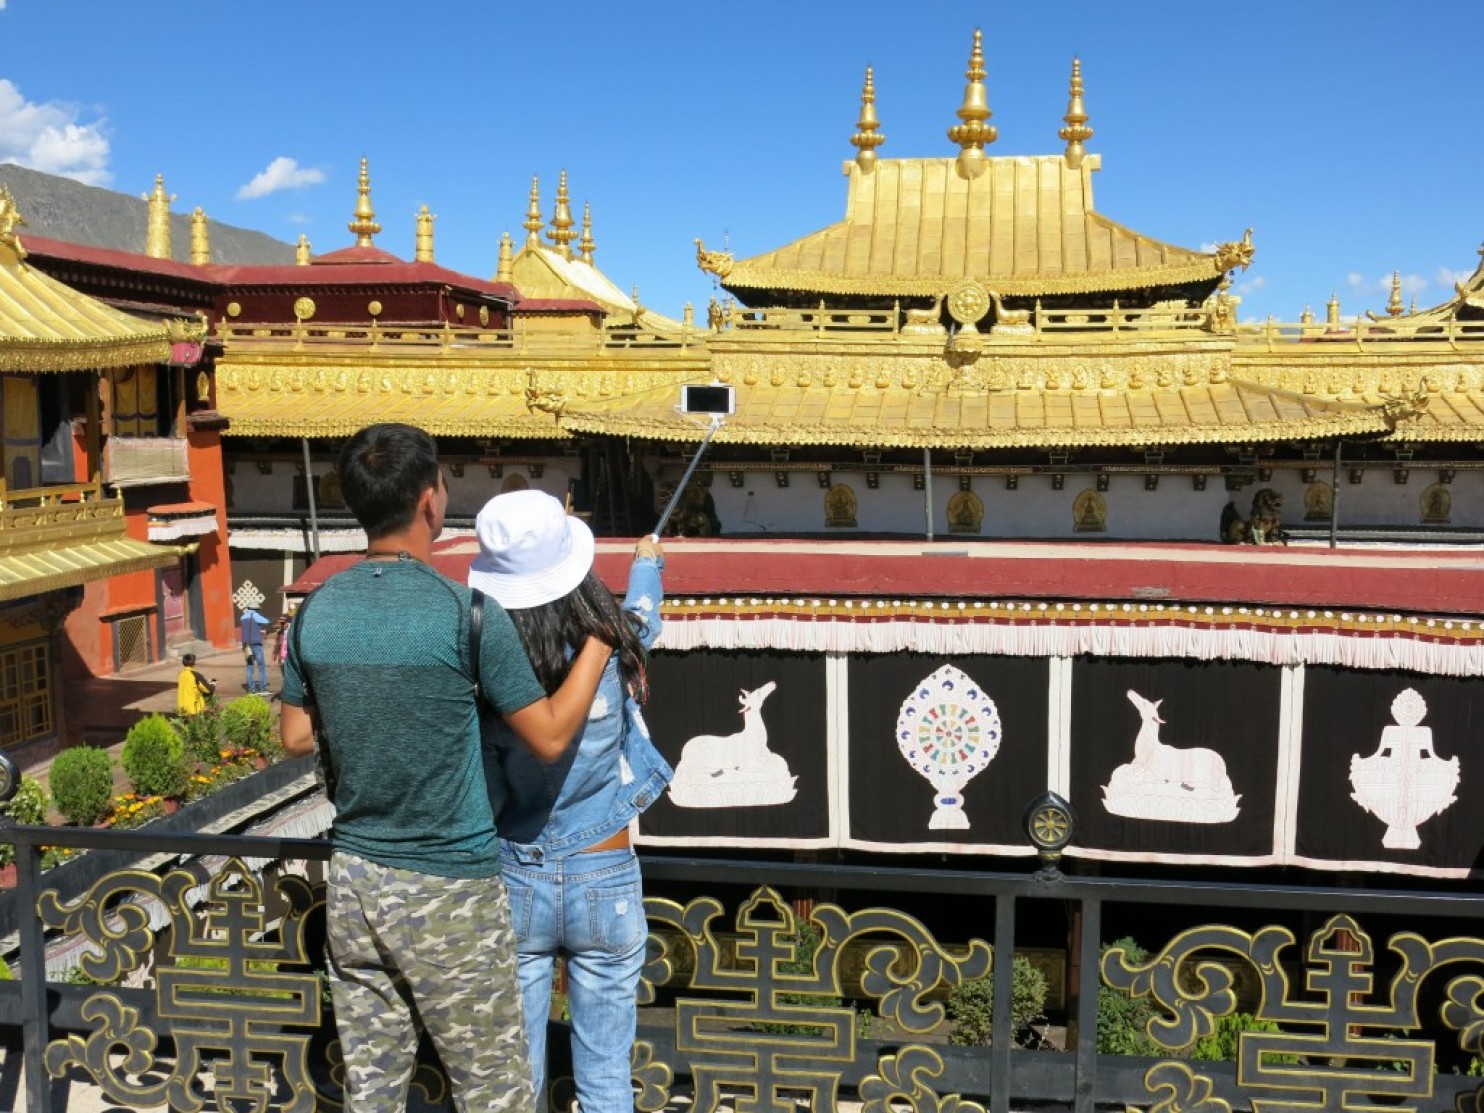 Tourists take a selfie at Jokhang Temple in Lhasa, China. (Photo courtesy/Simon Denyer/The Washington Post)